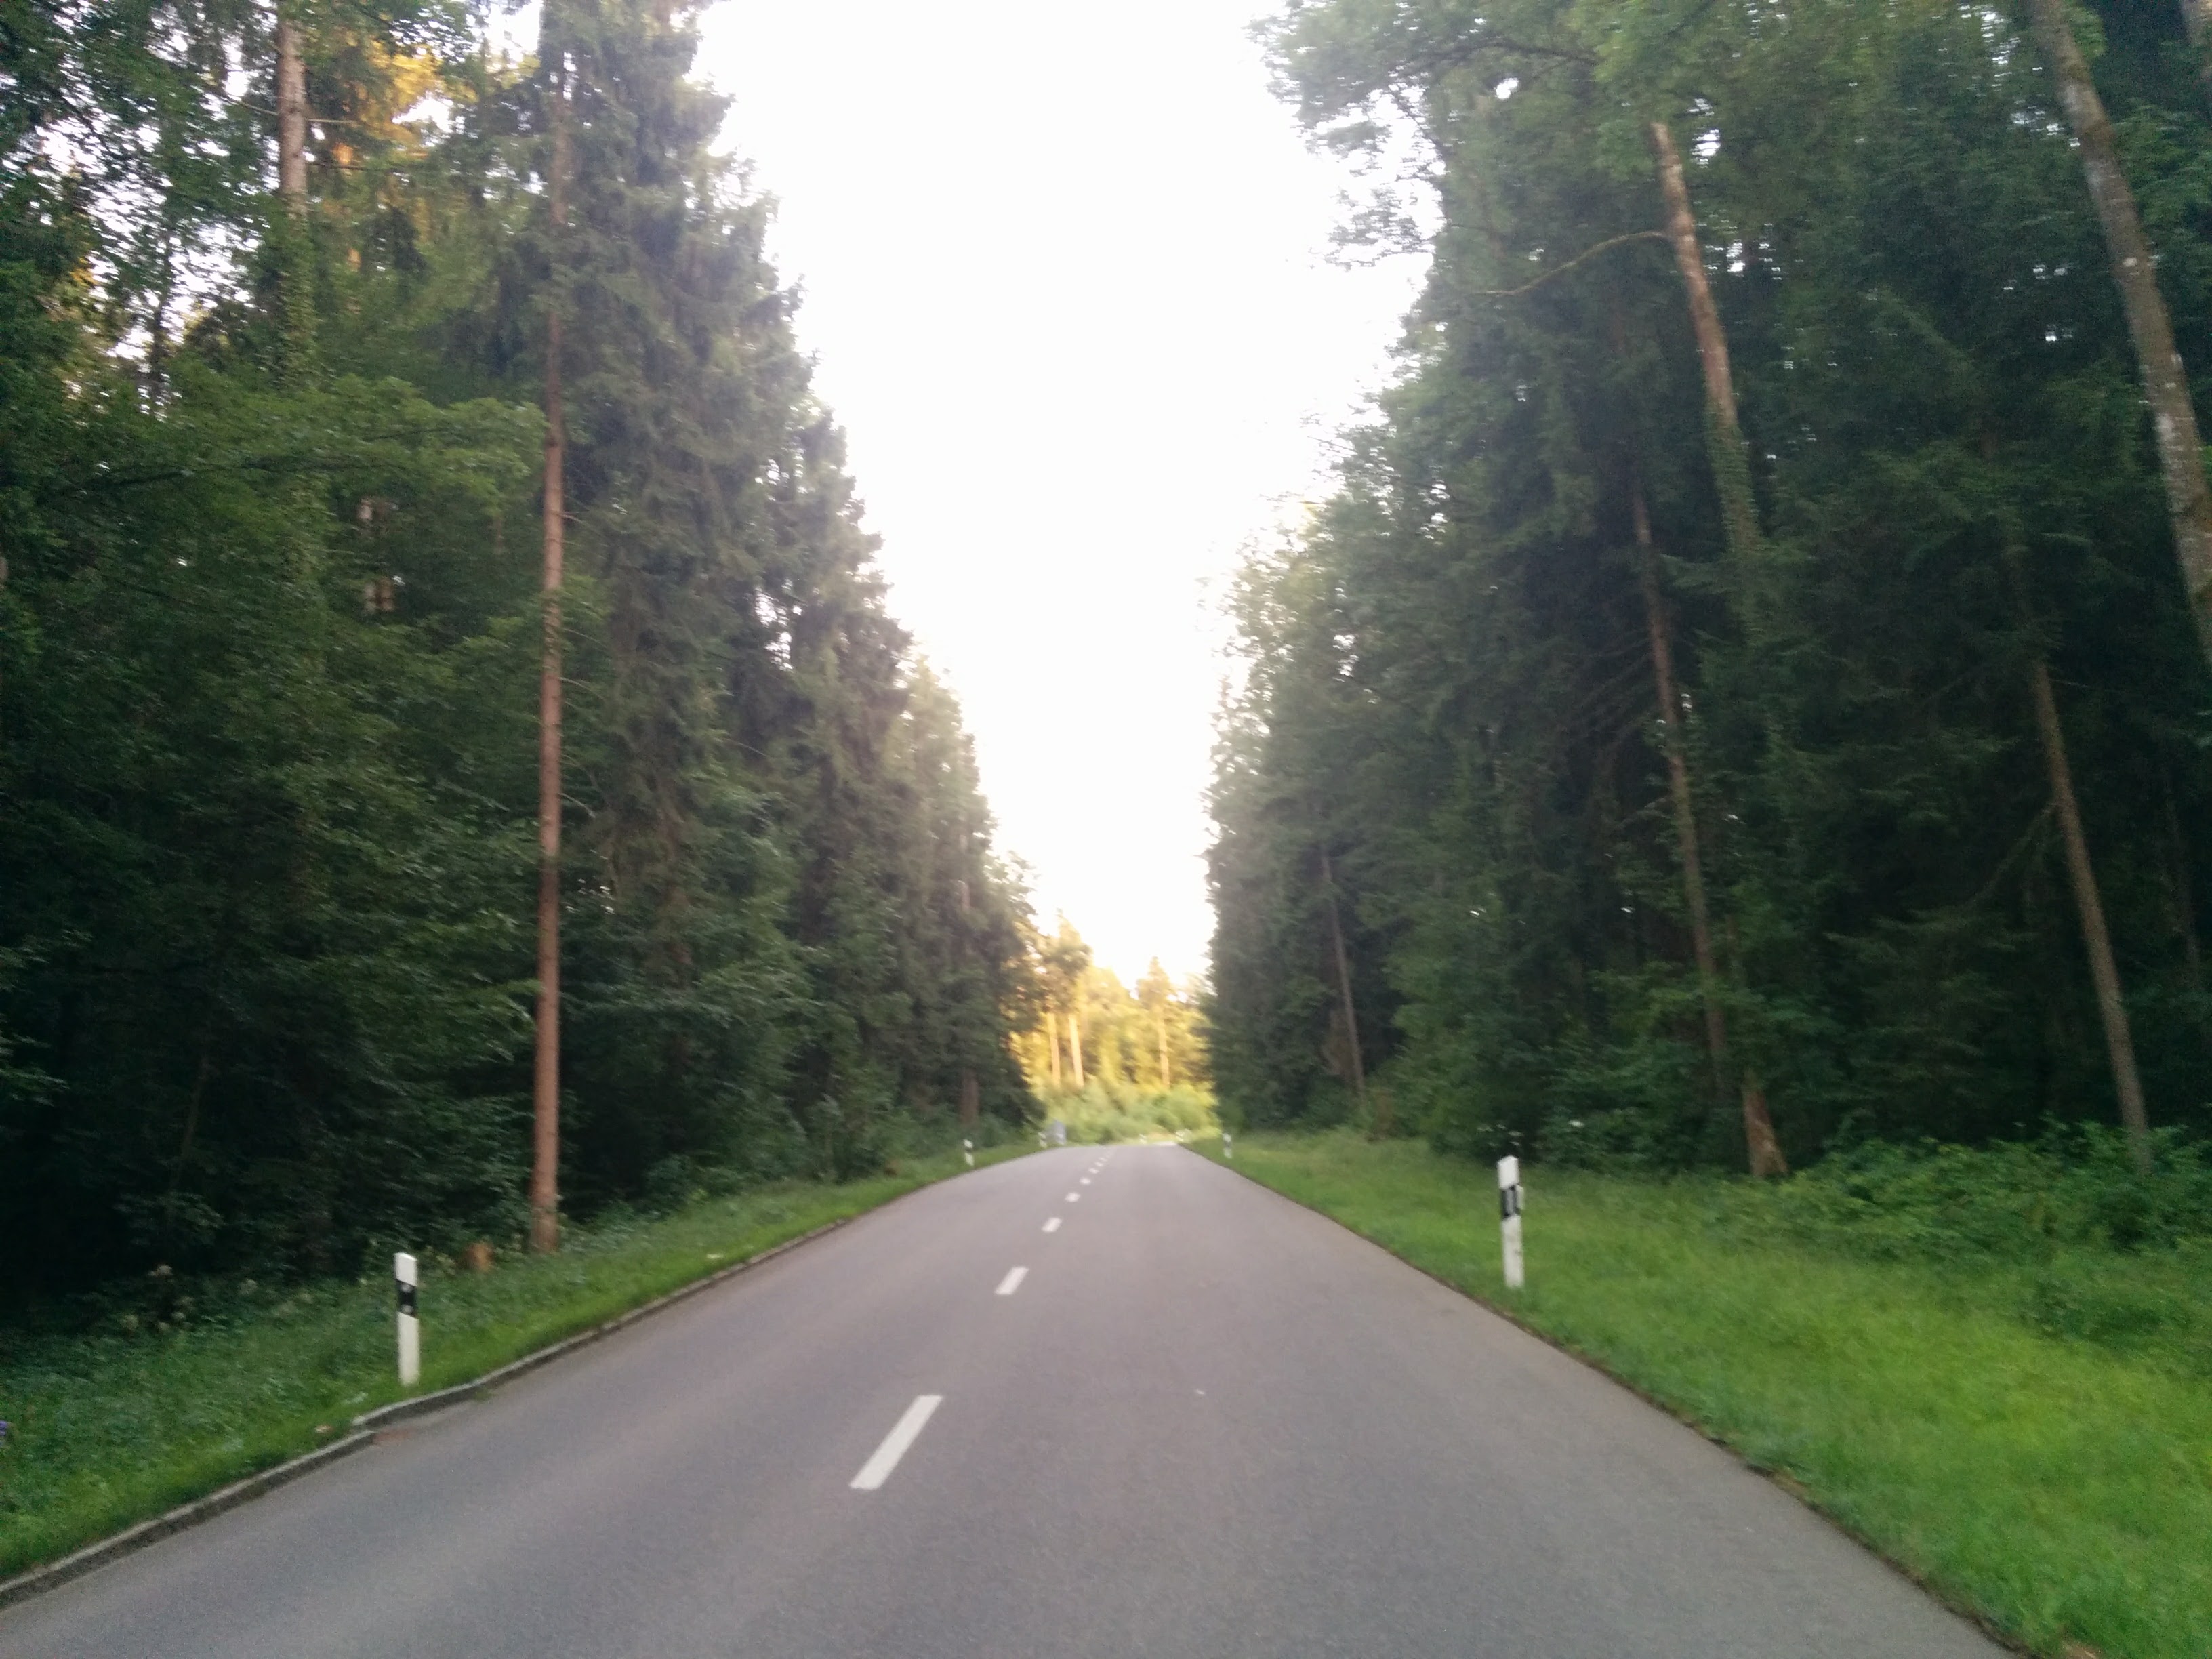 Uitikonstrasse - a road splitting through the forest.